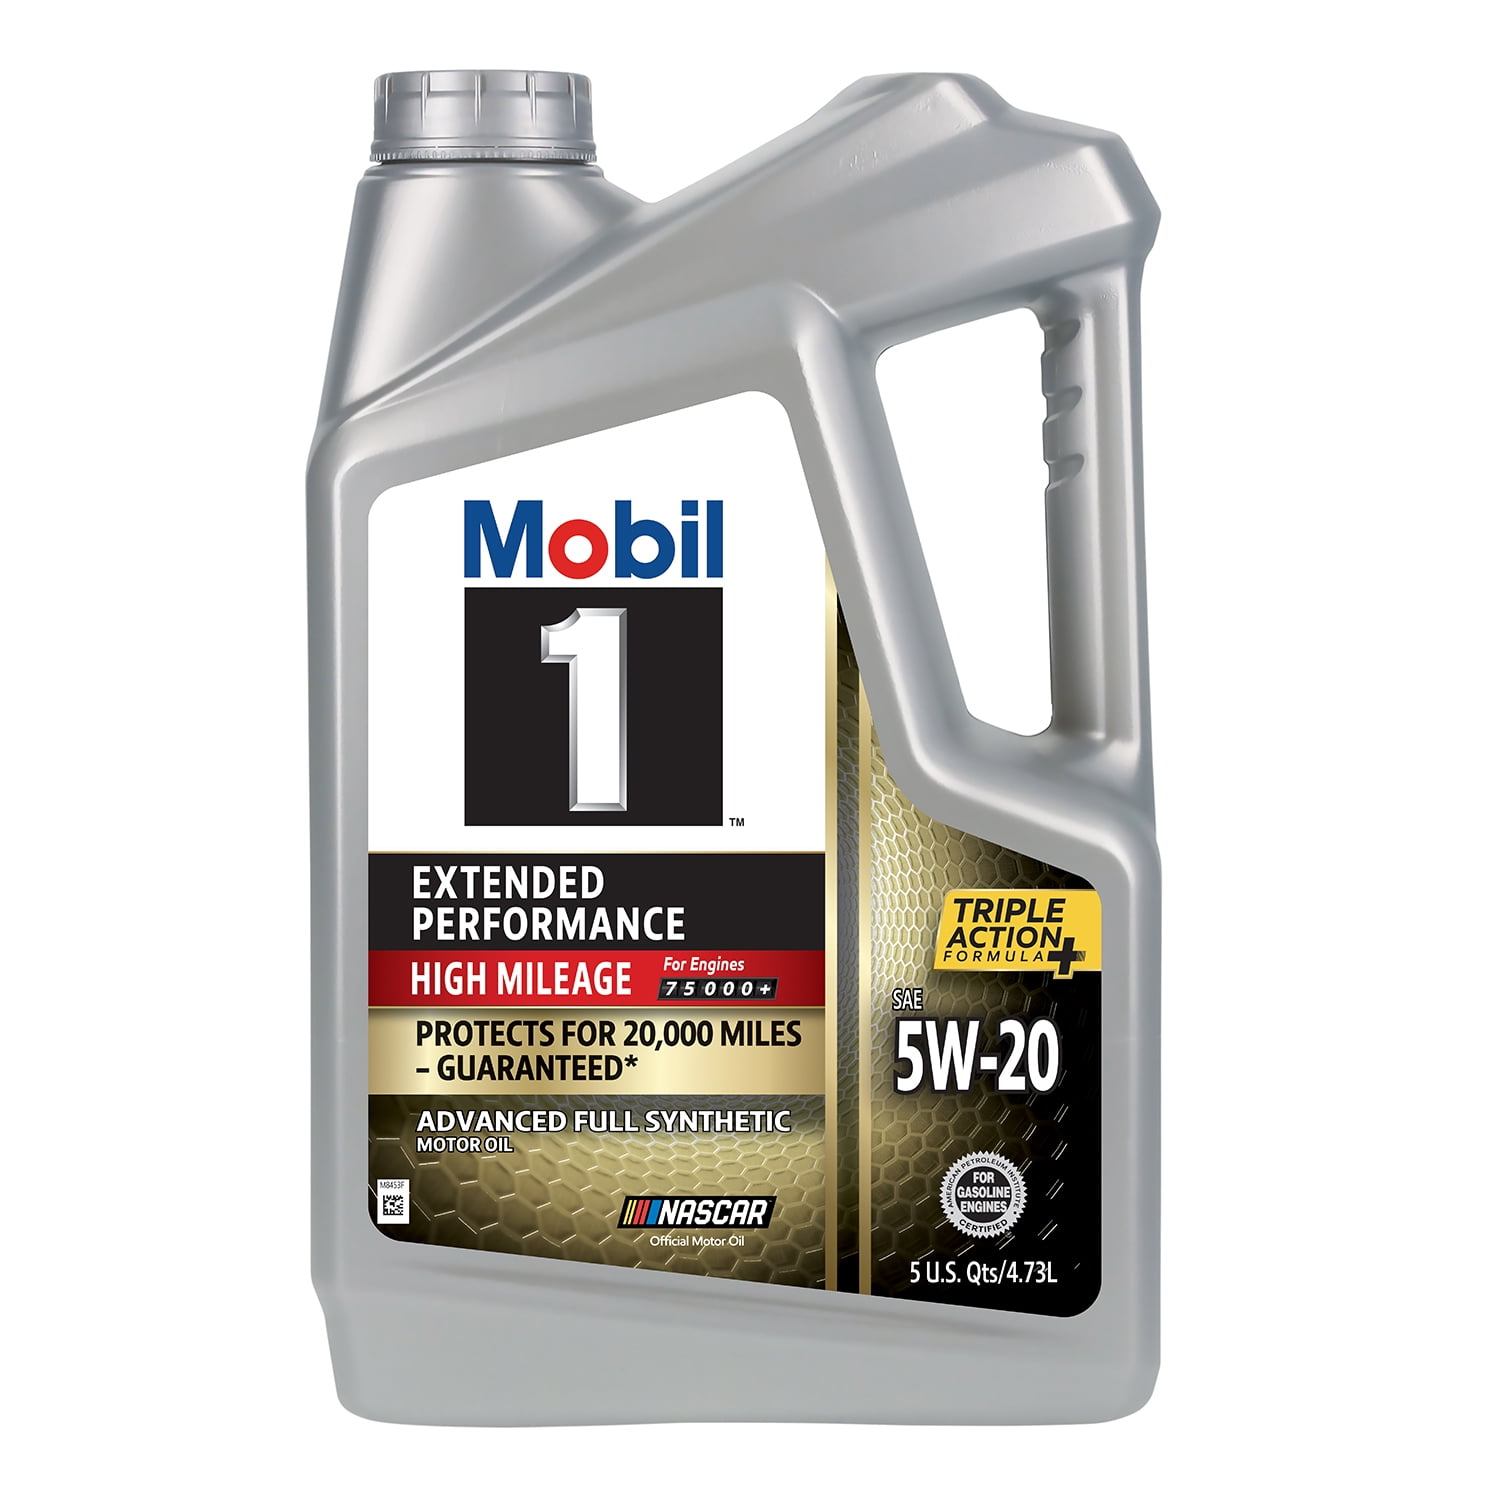 Mobil 1 Extended Performance High Mileage Full Synthetic Motor Oil 5W-20, 5  qt 